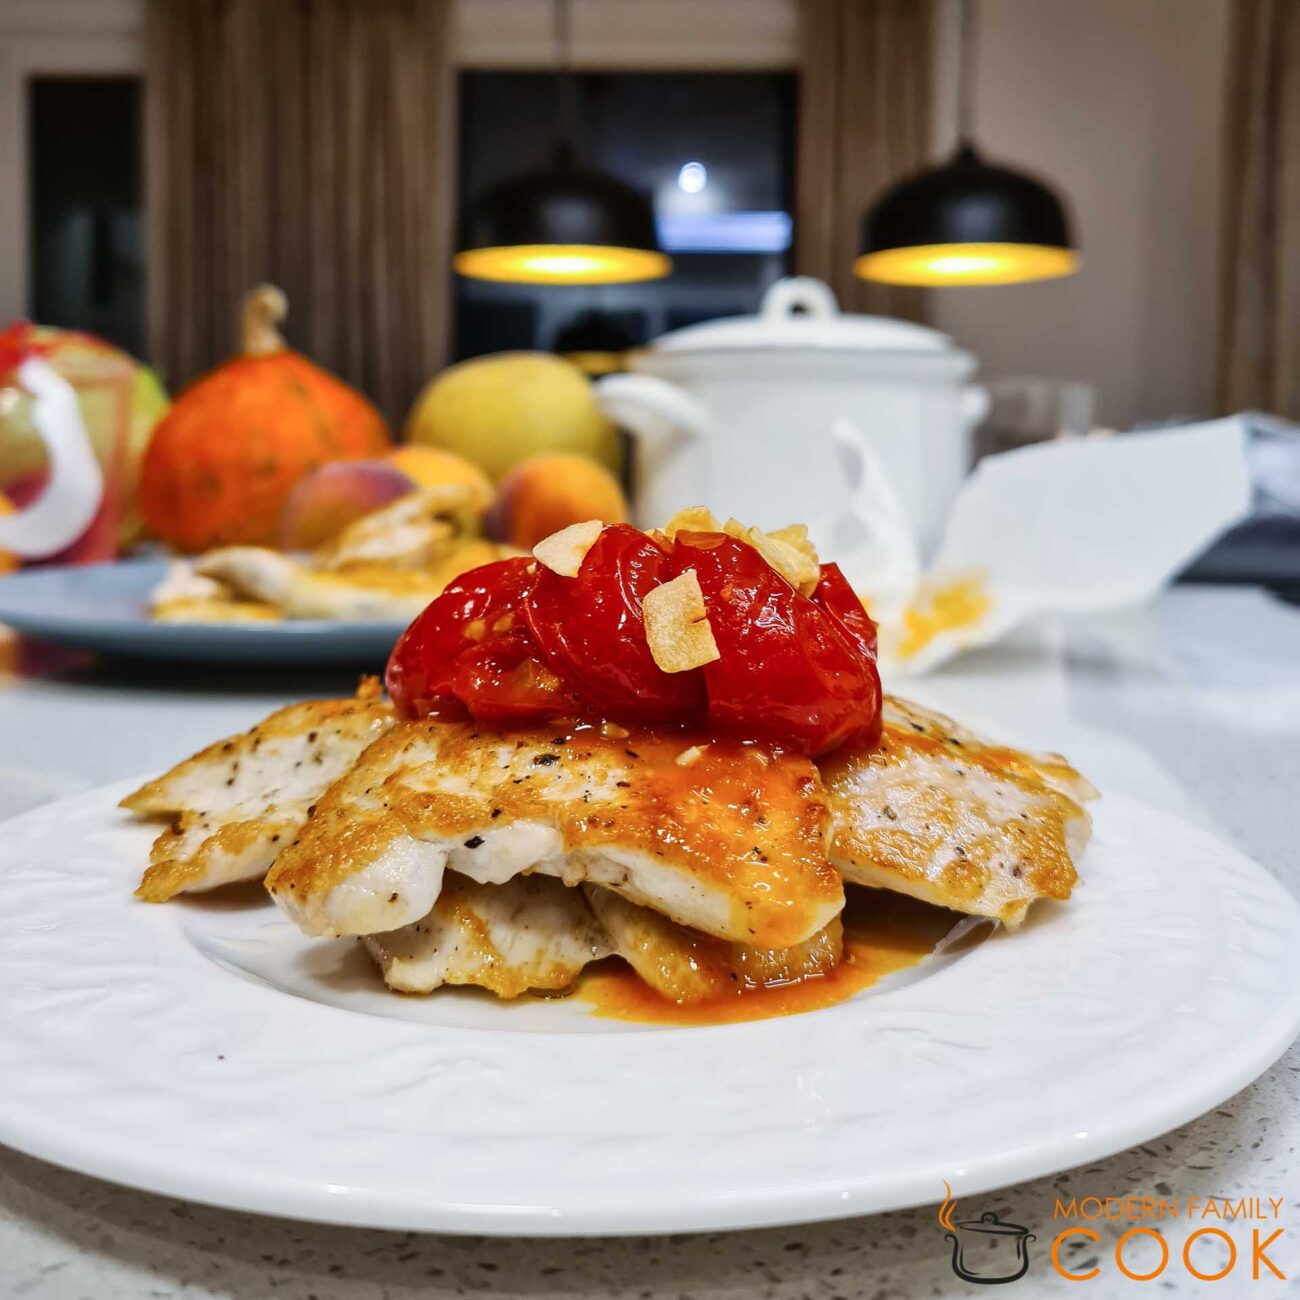 Chicken Breast with Cherry Tomato Compote and Garlic Chips